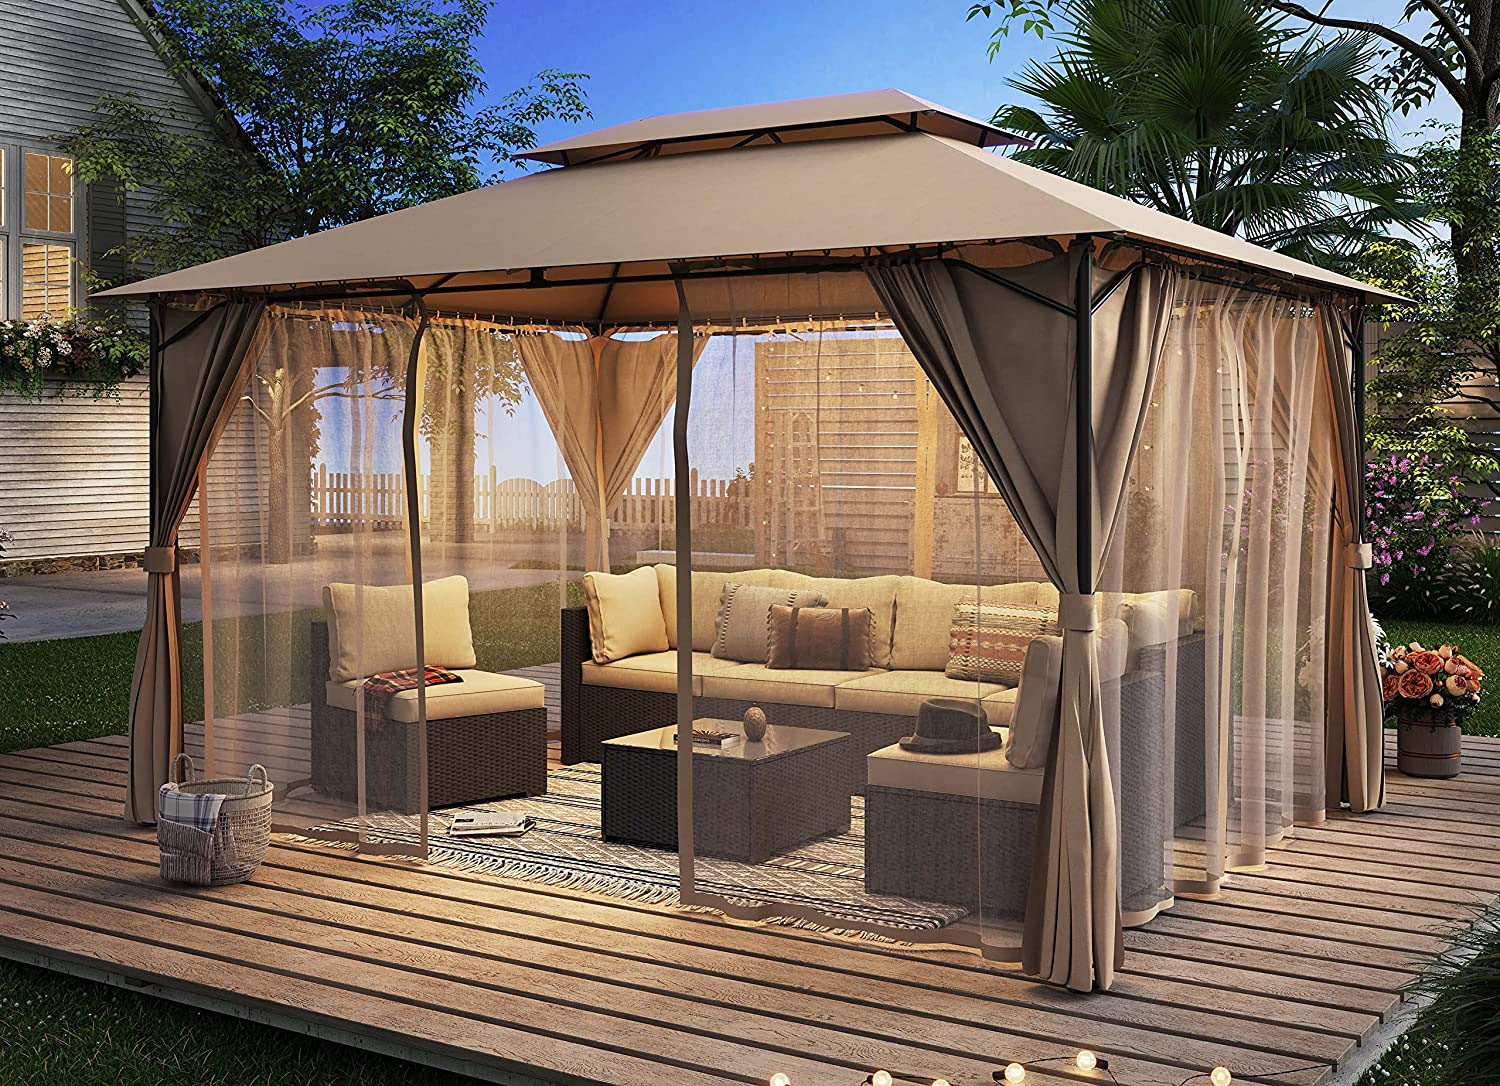 LAUSAINT 10x12Ft, Patio Outdoor Canopy Double Roof Tops with Privacy Screen. 450units. EXW Los Angeles $95.00unit.